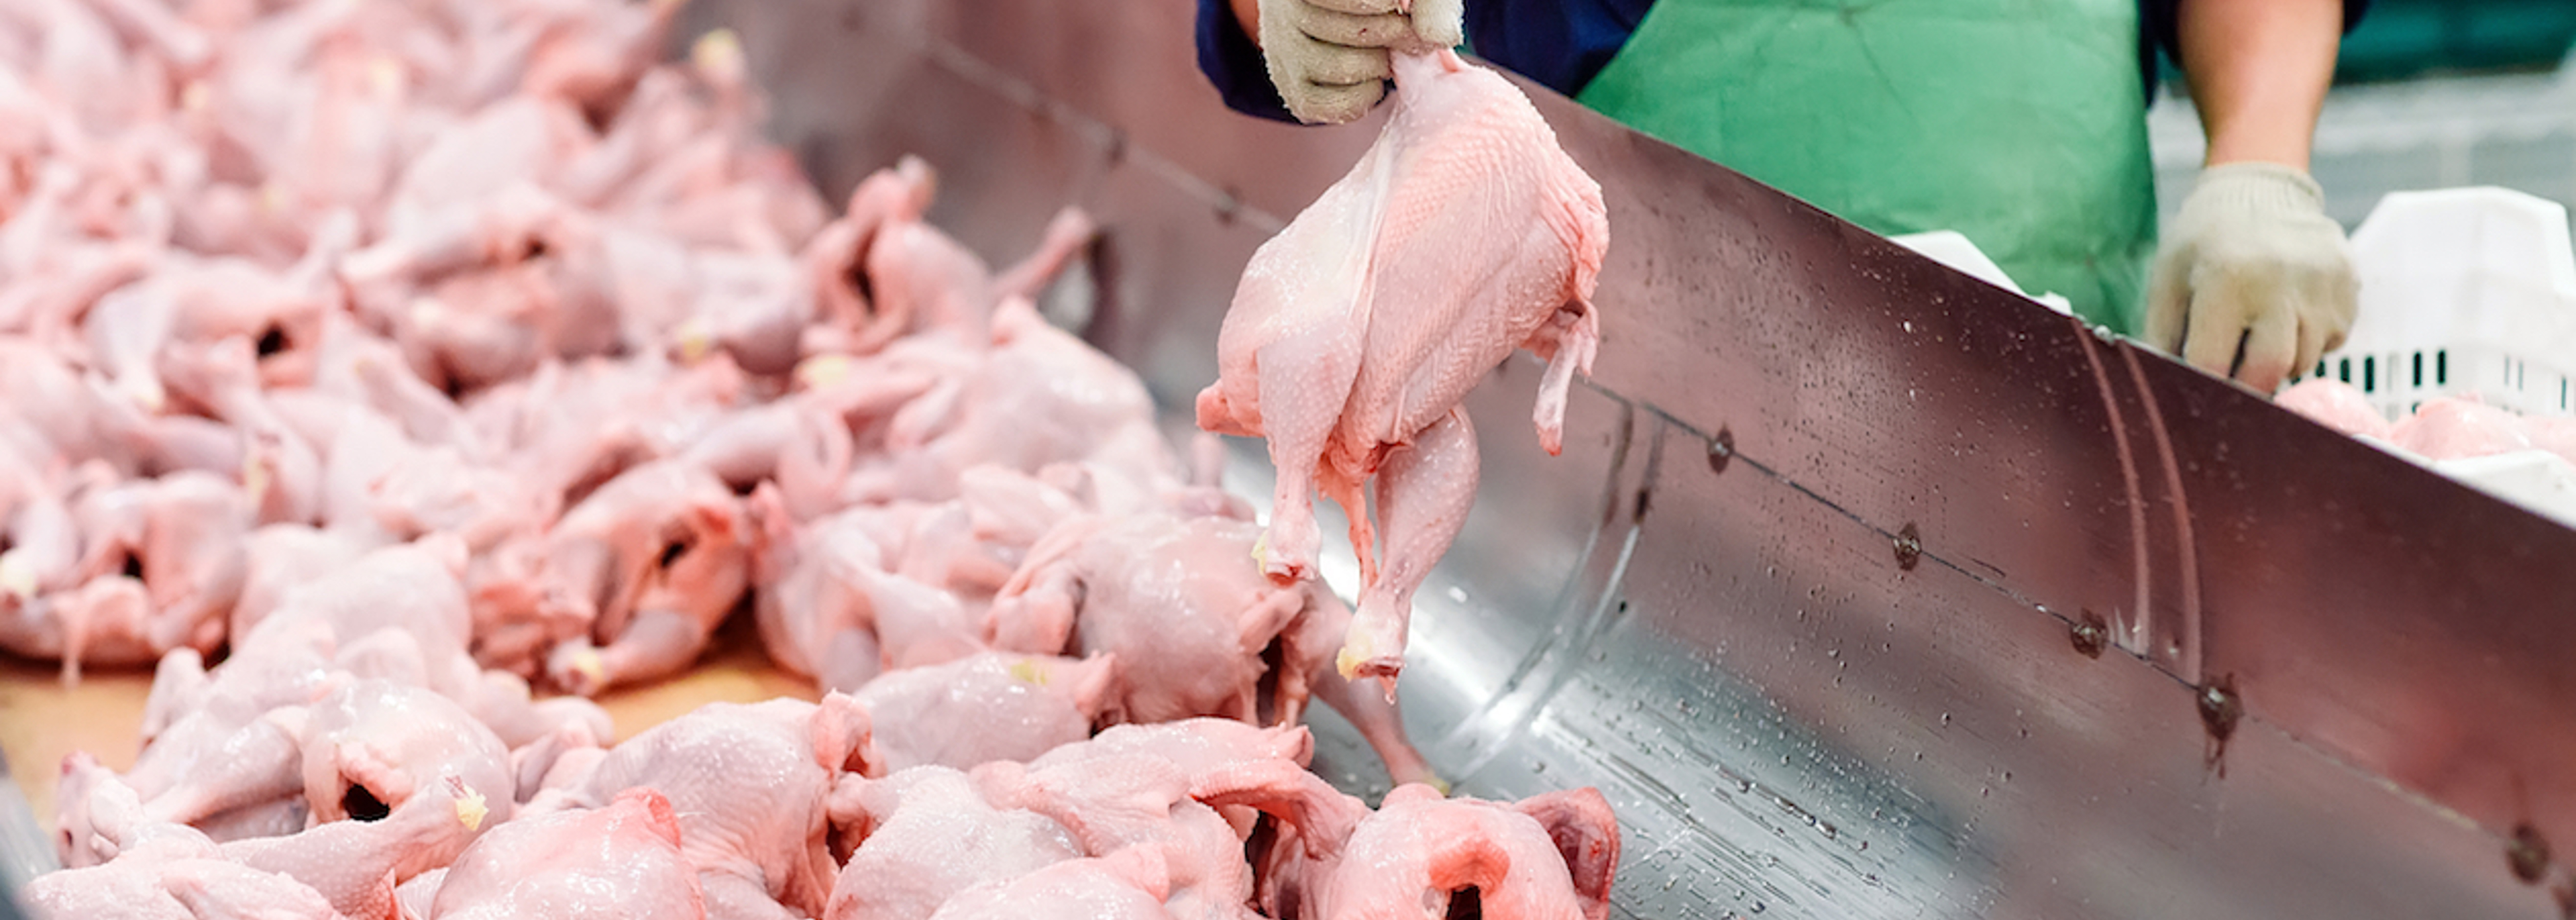 All 800 workers at poultry factory to self-isolate